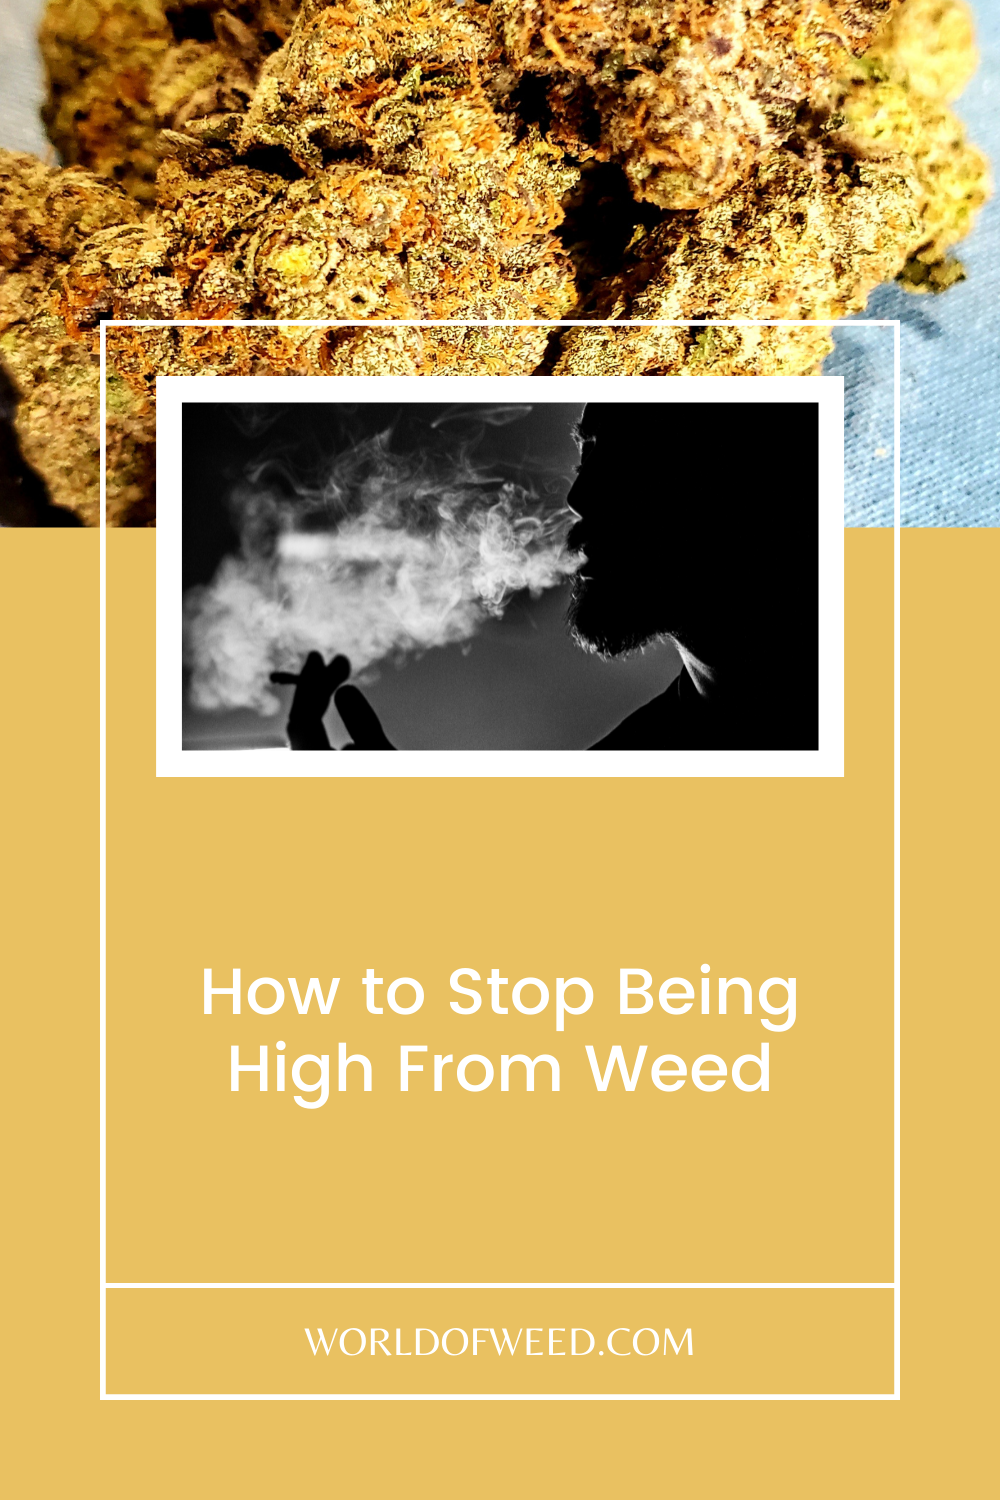 How to Stop Being High From Weed